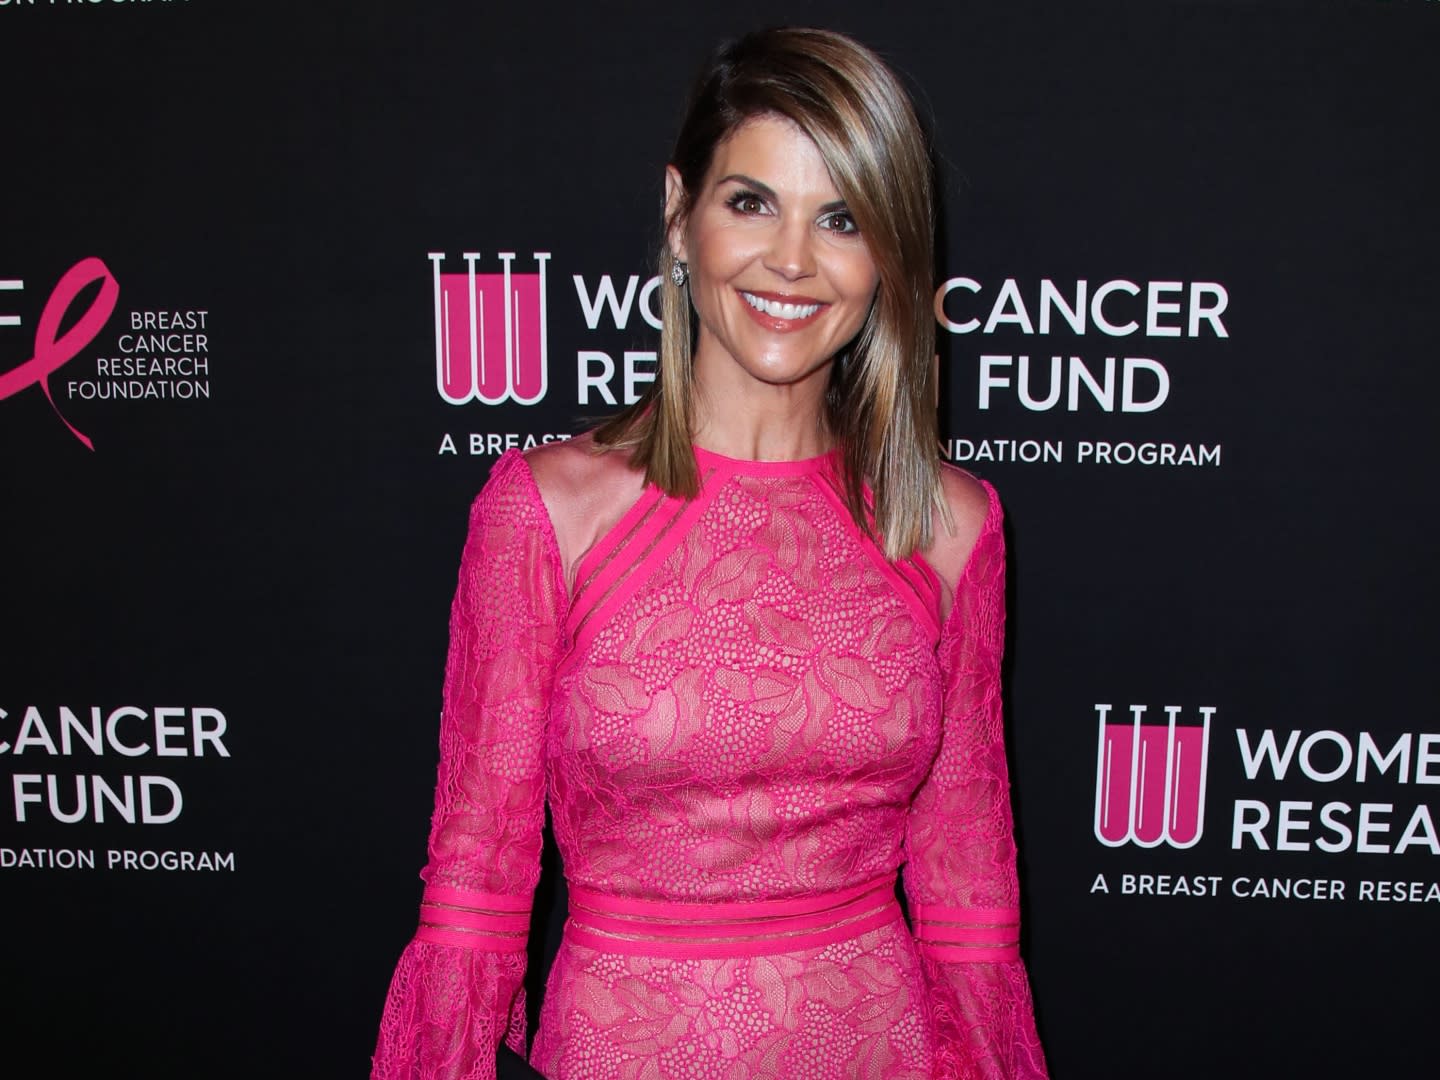 Lori Loughlin’s husband Mossimo Giannulli is not getting any special treatment behind bars